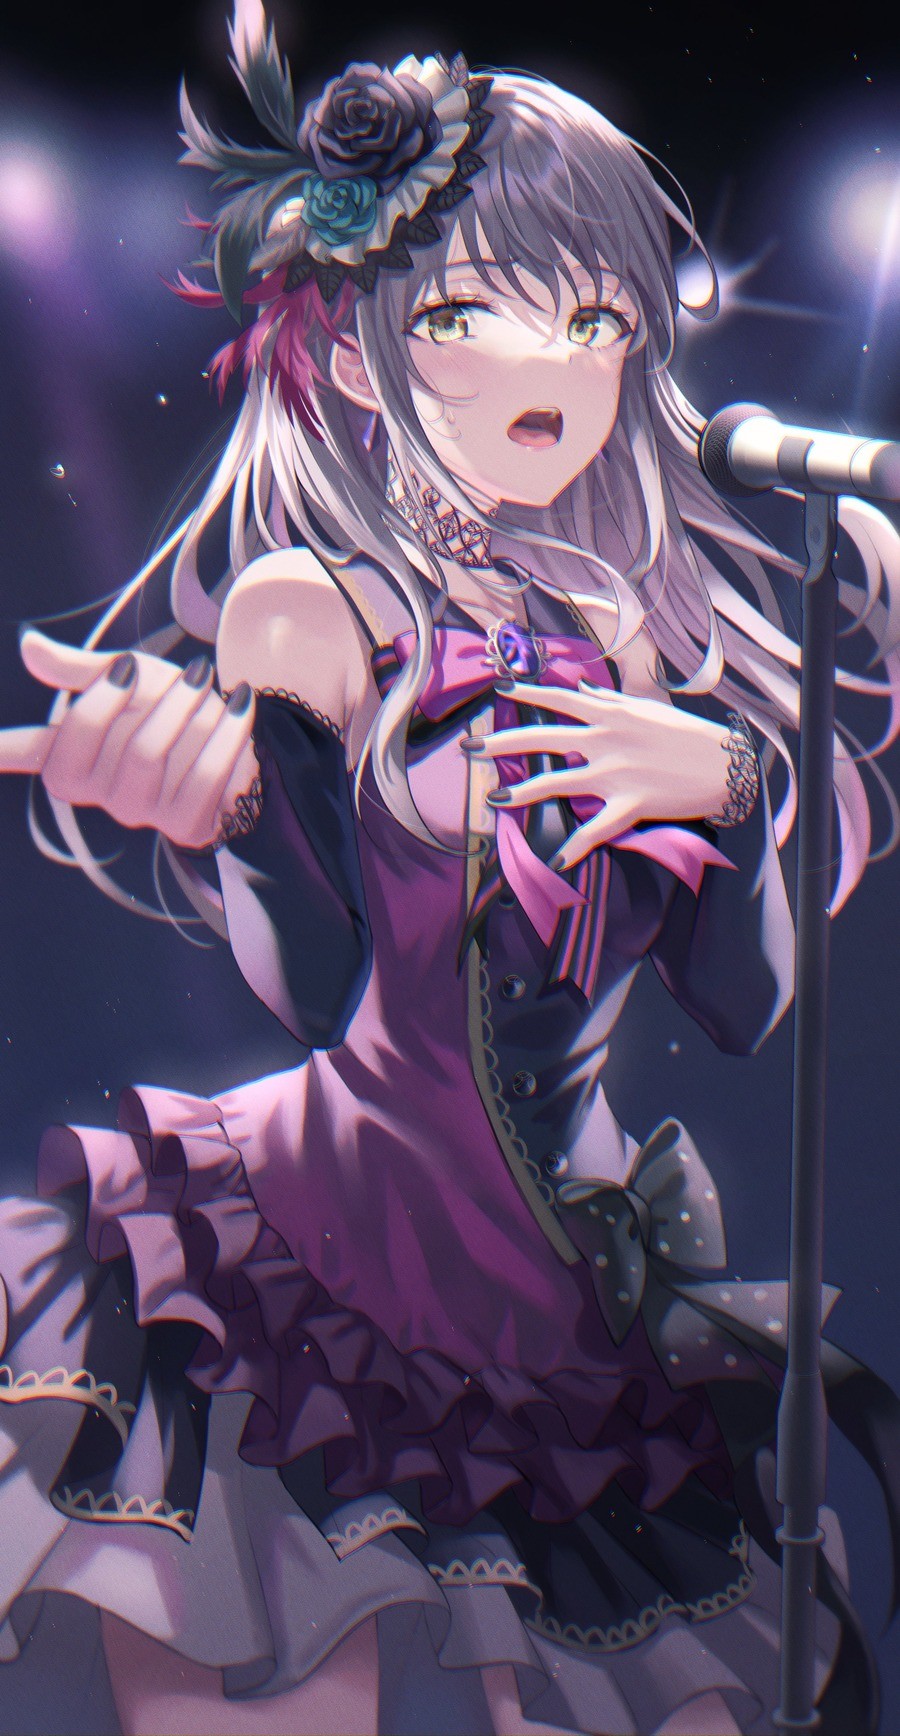 Daily BanG Dream #509. Artist's Twitter post: Girl is from BanG Dream join list: BanGDream (95 subs)Mention History &quot;もっと激しく!&quot; &quot;harder!&quot;.